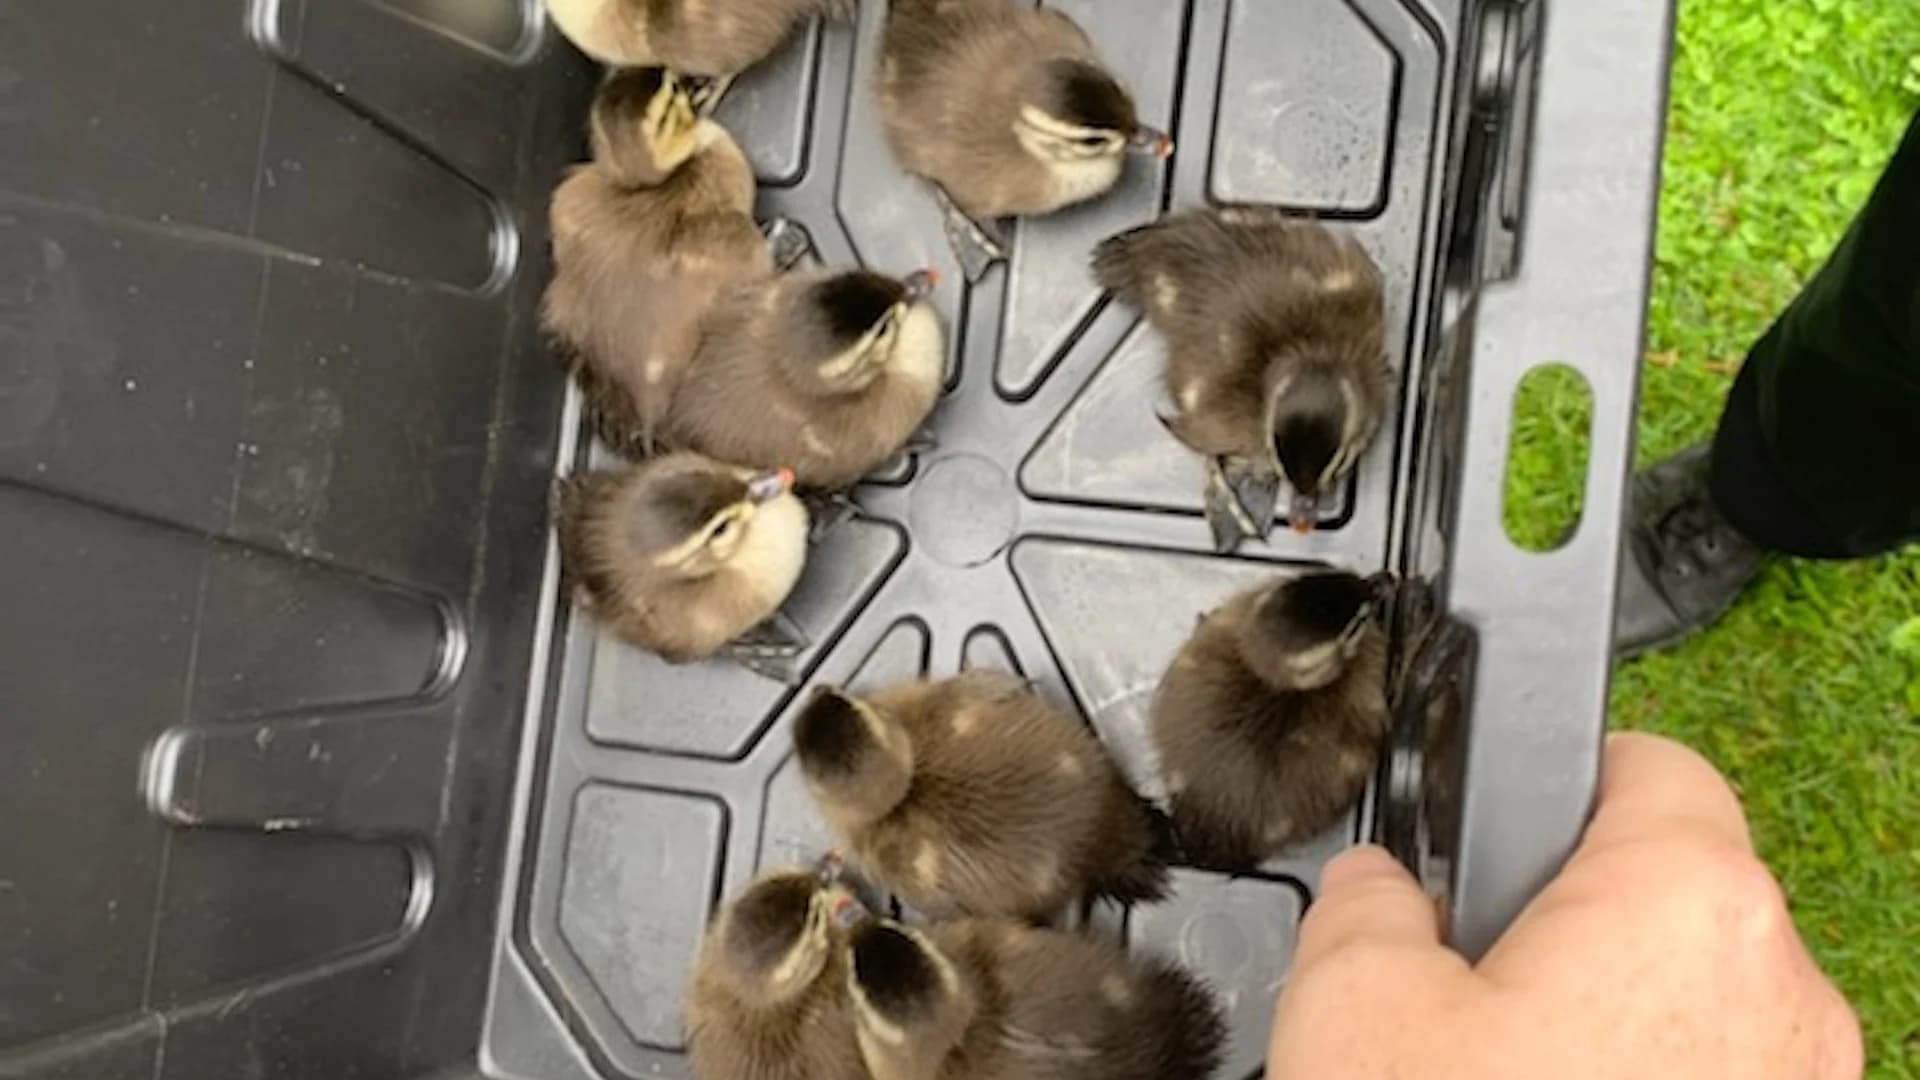 Poughkeepsie PD rescues baby ducklings caught in storm drain